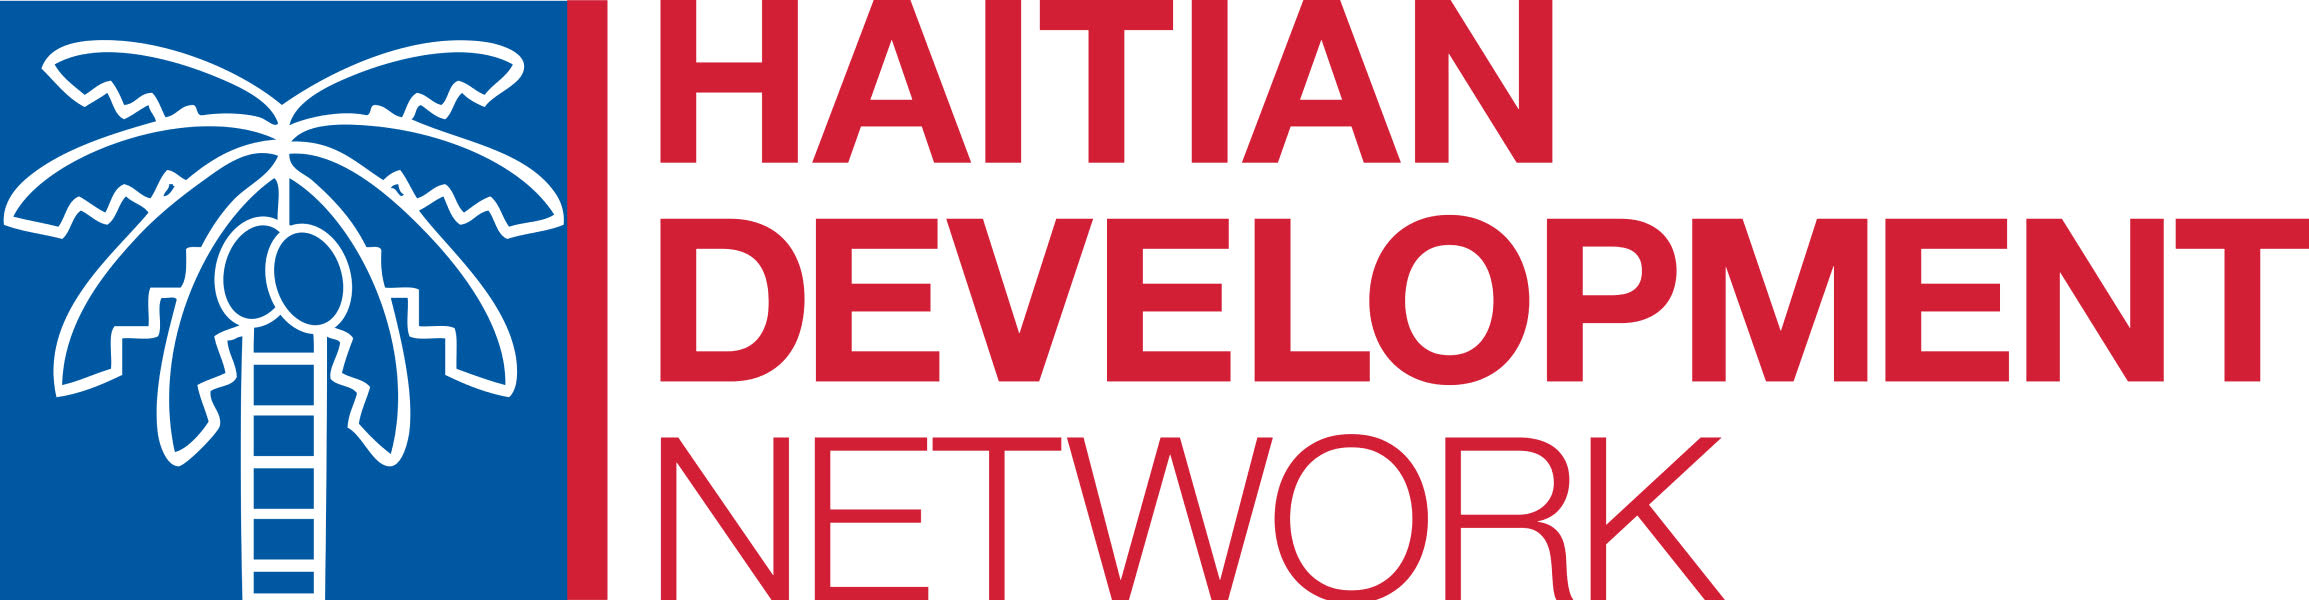 Haitian Development Network’s Comprehensive Efforts to Revitalize Haiti: Addressing Poverty, Violence, and Hunger